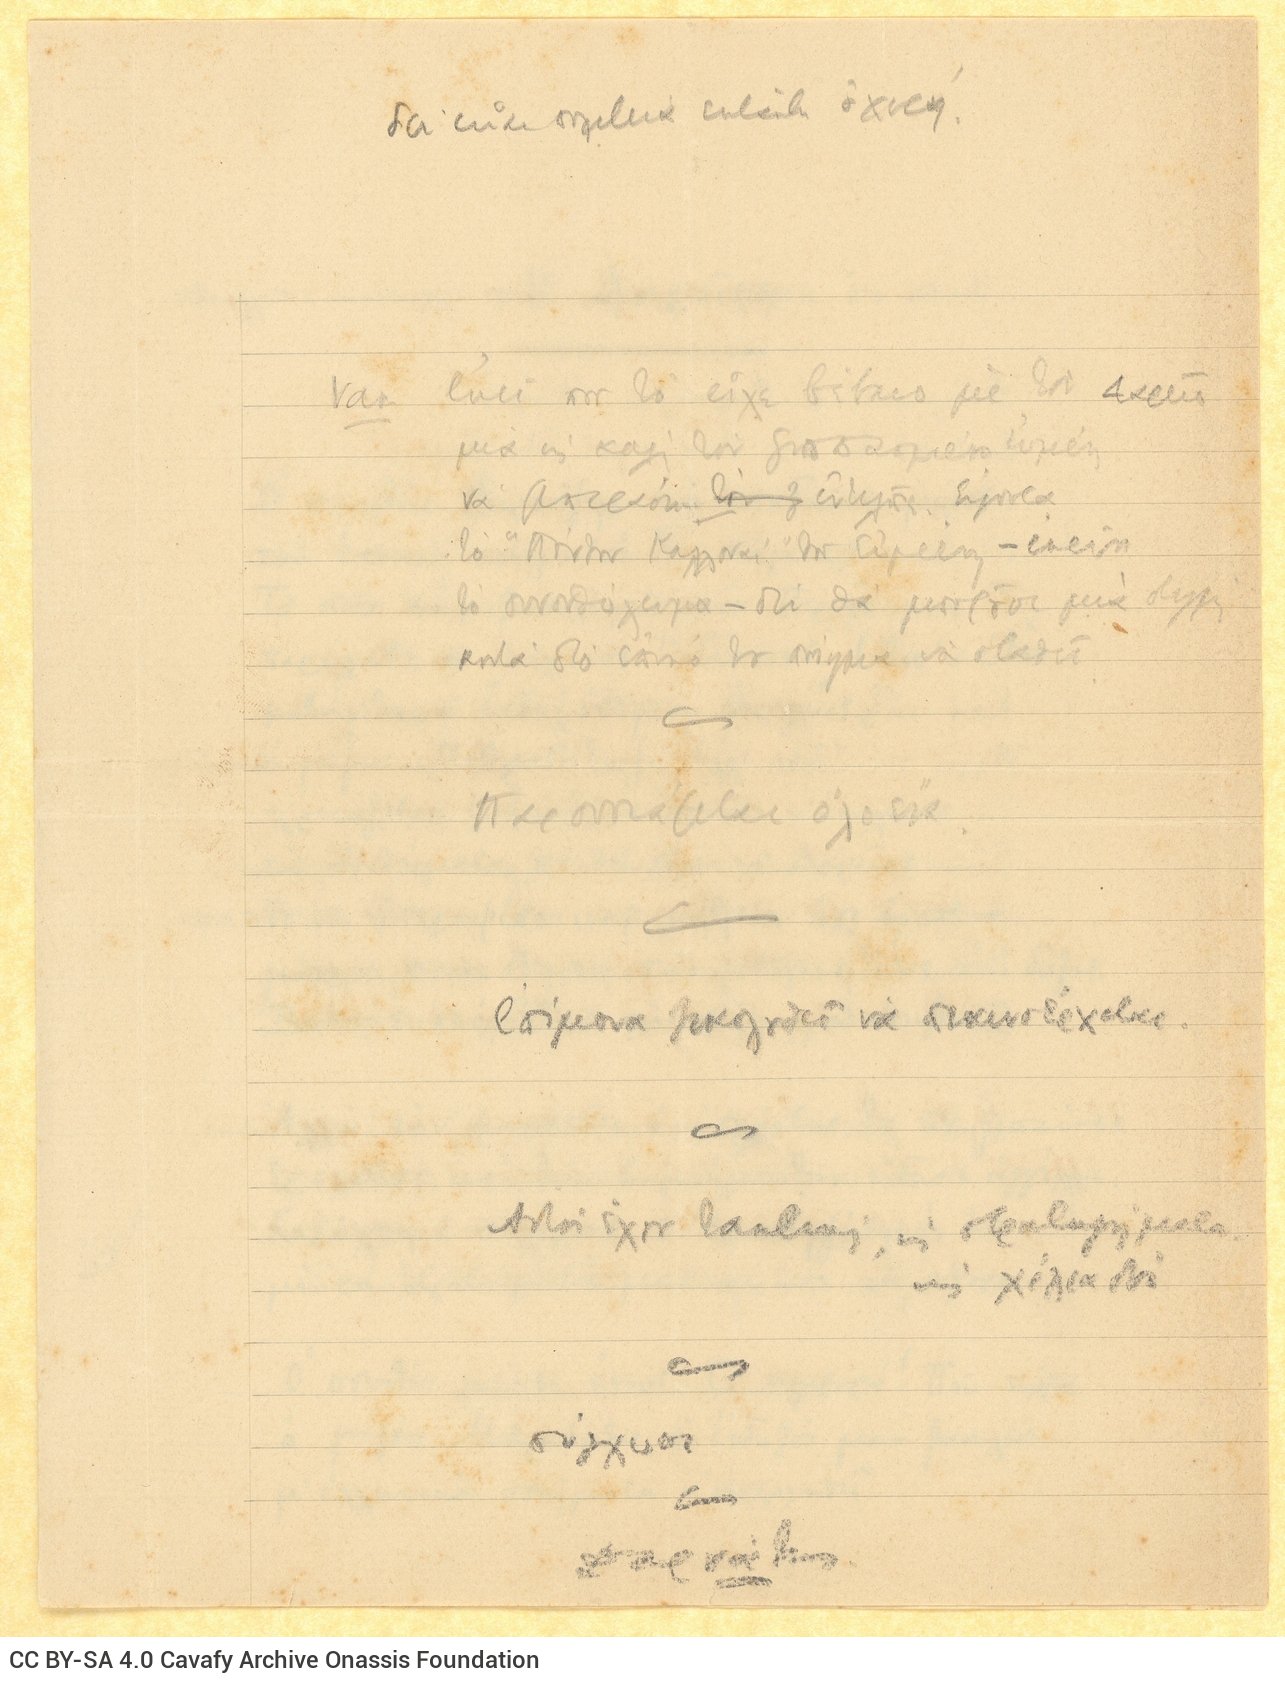 Manuscript of the poem "Darius" on the first two pages of a double sheet notepaper. Notes in pencil on the third page; the